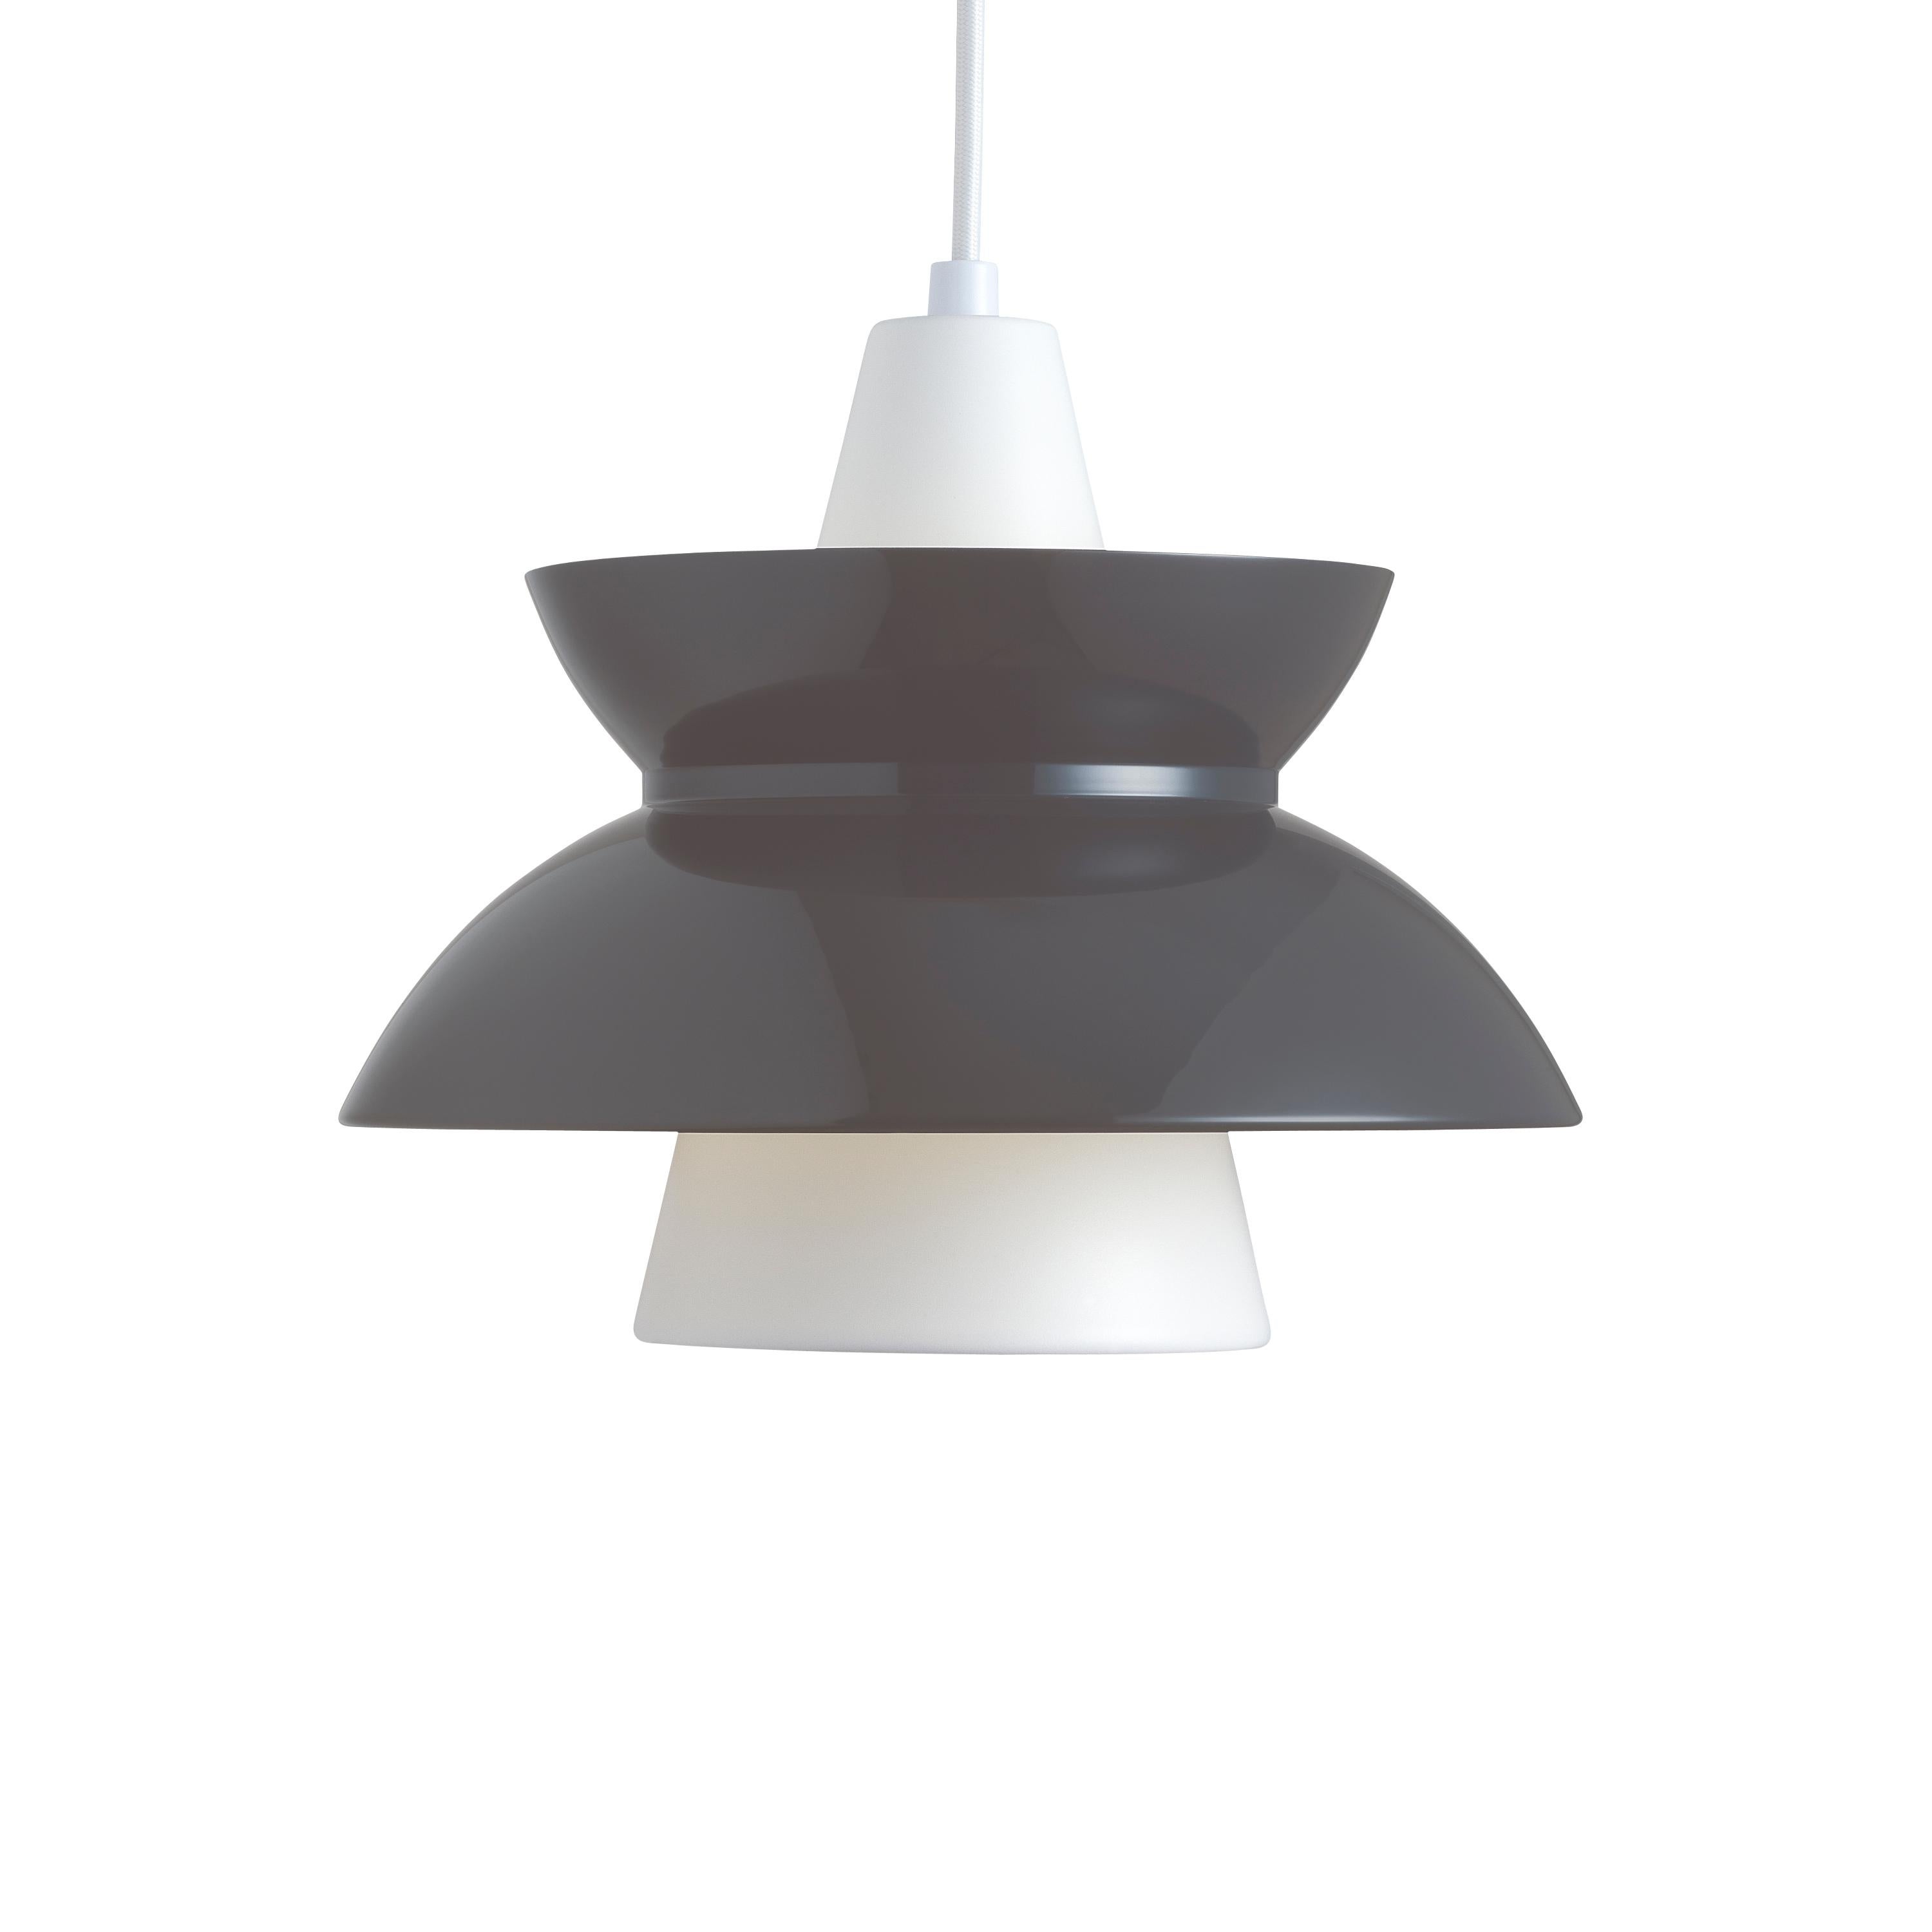 Jørn Utzon 'Doo-Wop' pendants for Louis Poulsen. Designed in the 1950s and re-editioned in 2016. Available in white and dark gray. 

Price is per item. 

Originally introduced in the 1950s, the Doo-Wop pendant light was designed in close cooperation